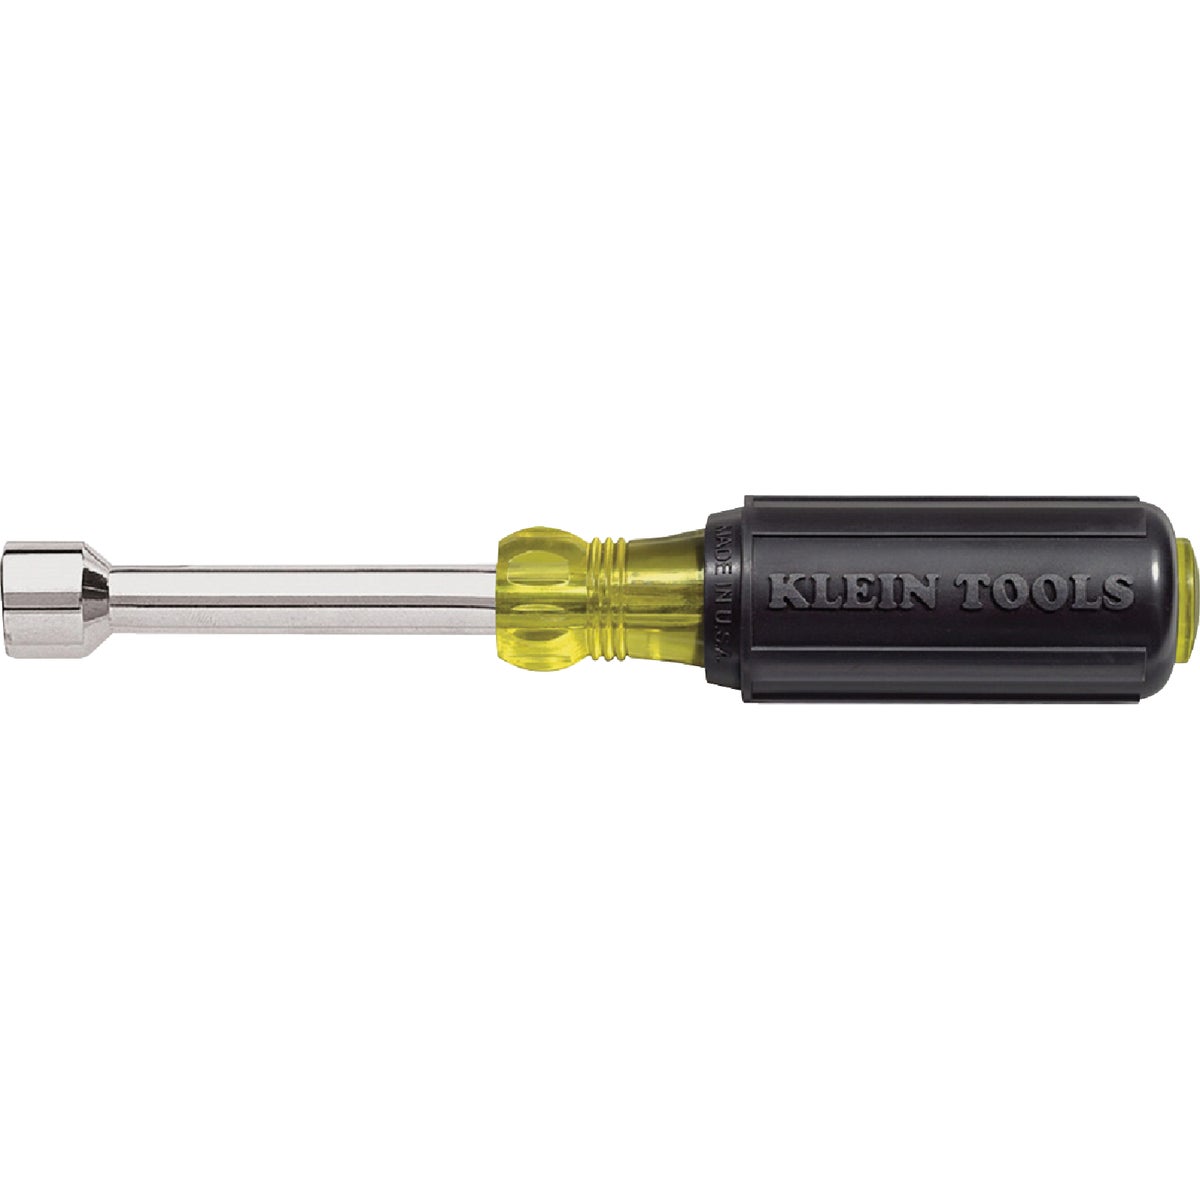 Klein Standard 7/16 In. Nut Driver with 3 In. Hollow Shank